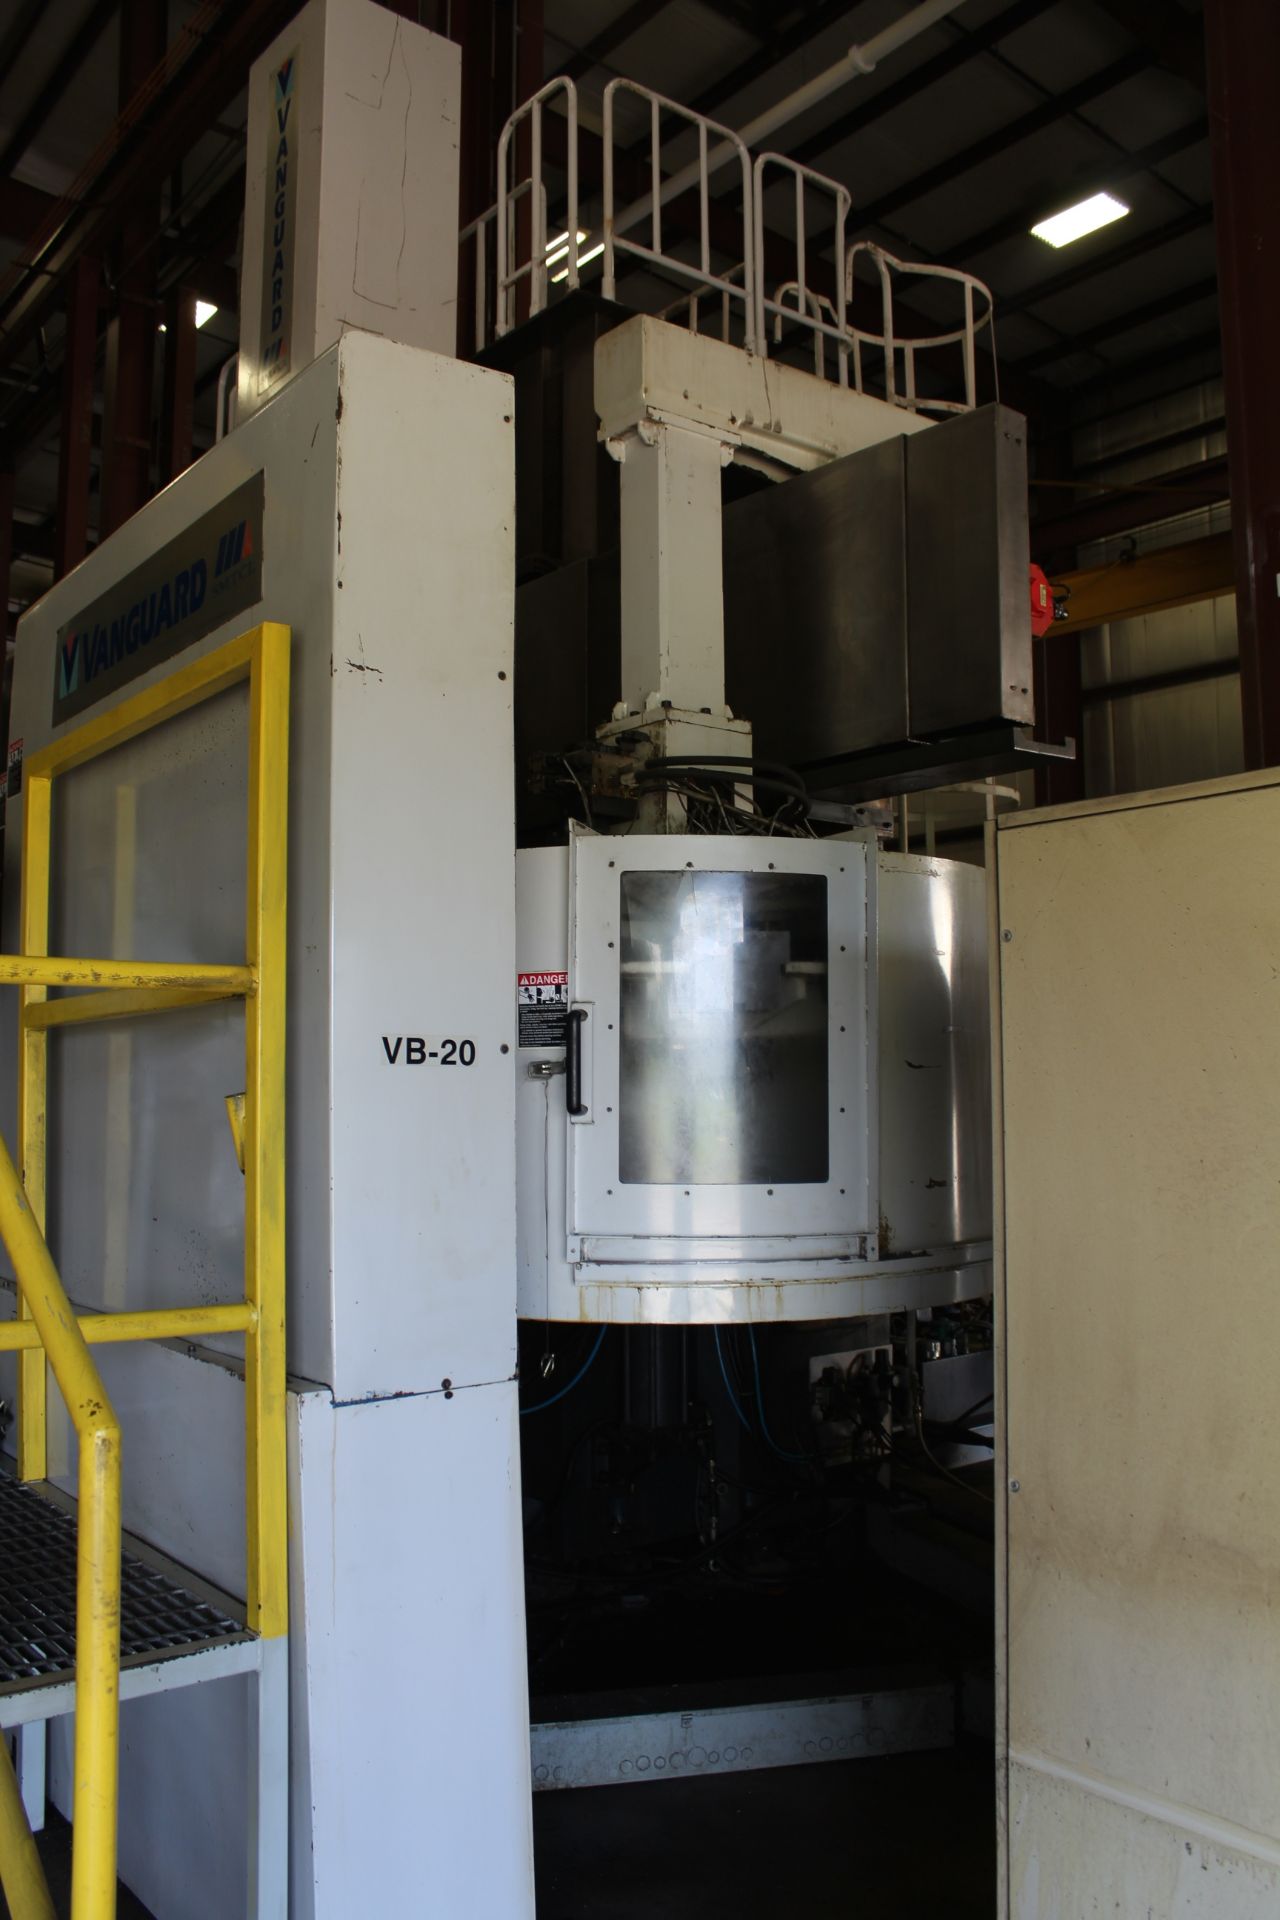 VANGUARD SMTCL GTC200160 CNC VERTICAL BORING MILL, 78" MAX TURNING DIA, 78" MAX TURNING HEIGHT, - Image 9 of 12